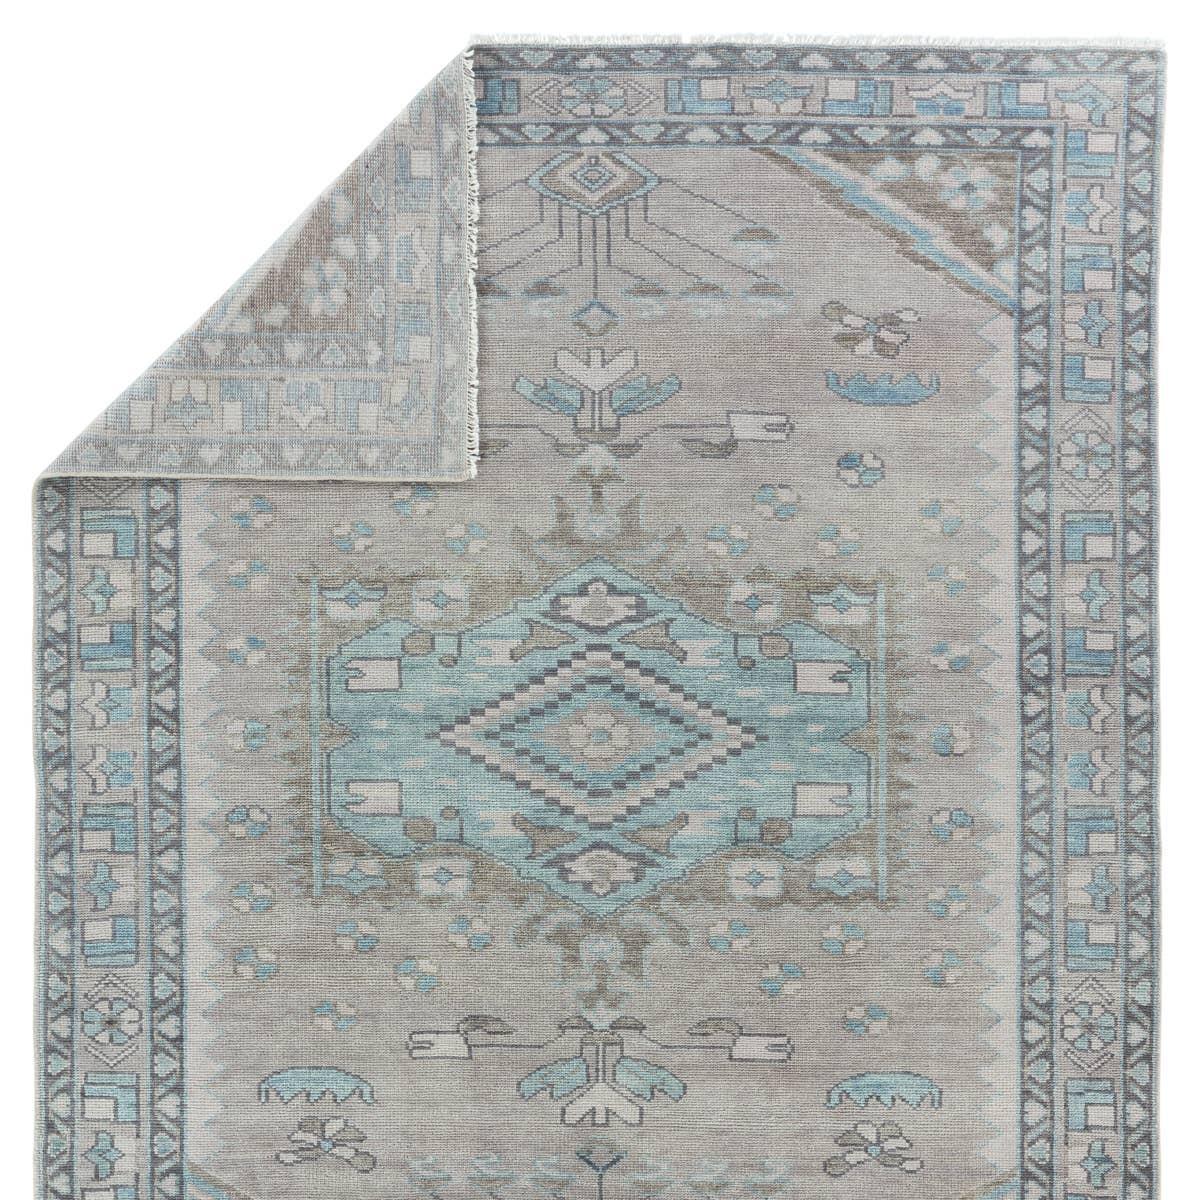 The Salinas Santita is punctuated by both vibrant and neutral hues and combined with intricate details, lending a stunning transitional look to any home. The Santita rug makes a moody statement with grounding hues and a tribal, medallion motifs. This durable, artisan-made rug features geometric accents in a serene gray, blue, and taupe colorway. Amethyst Home provides interior design, new home construction design consulting, vintage area rugs, and lighting in the Park City metro area.